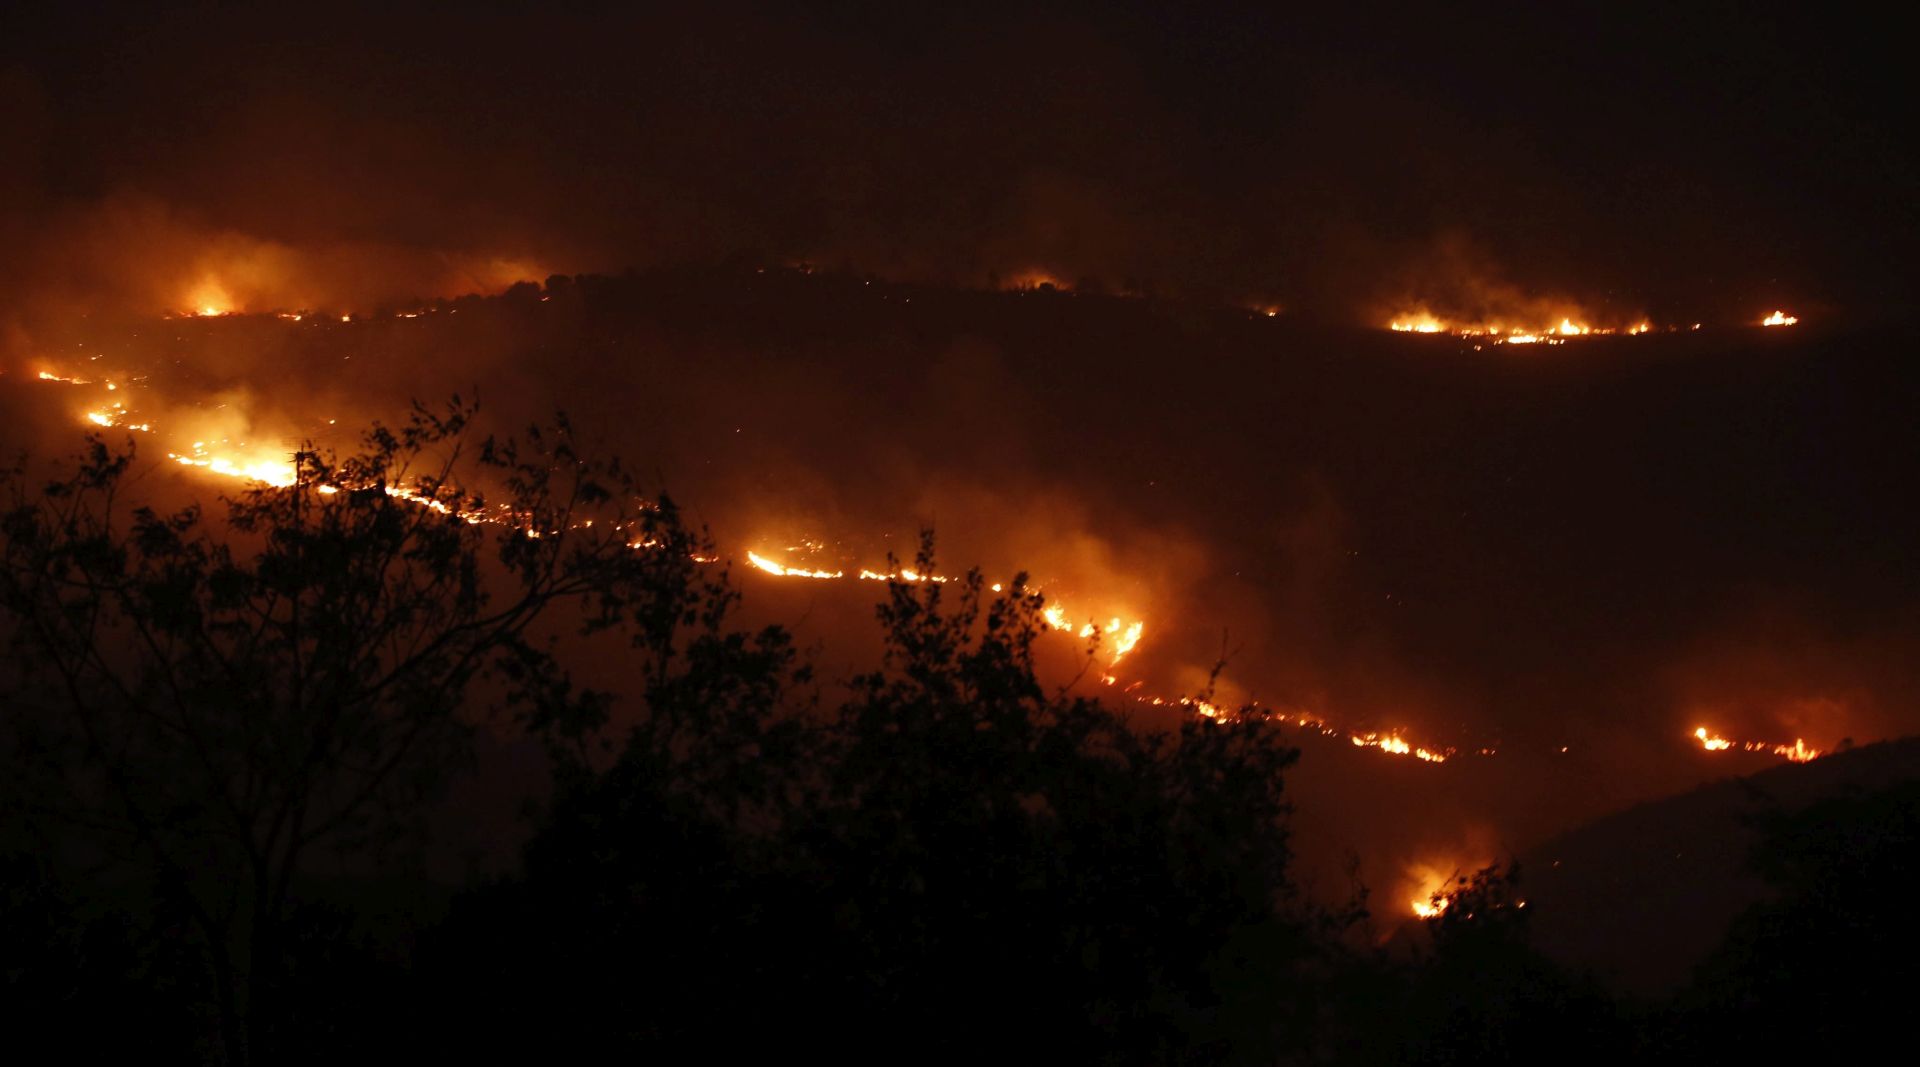 epa05647163 A general view showing flames rising from a fire in Nataf near Jerusalem, Israel, 25 November 2016. A string of wildfires raged on in areas of central and northern Israel on 25 November forcing hundreds more people to evacuate their homes, Israeli police said.  EPA/ABIR SULTAN